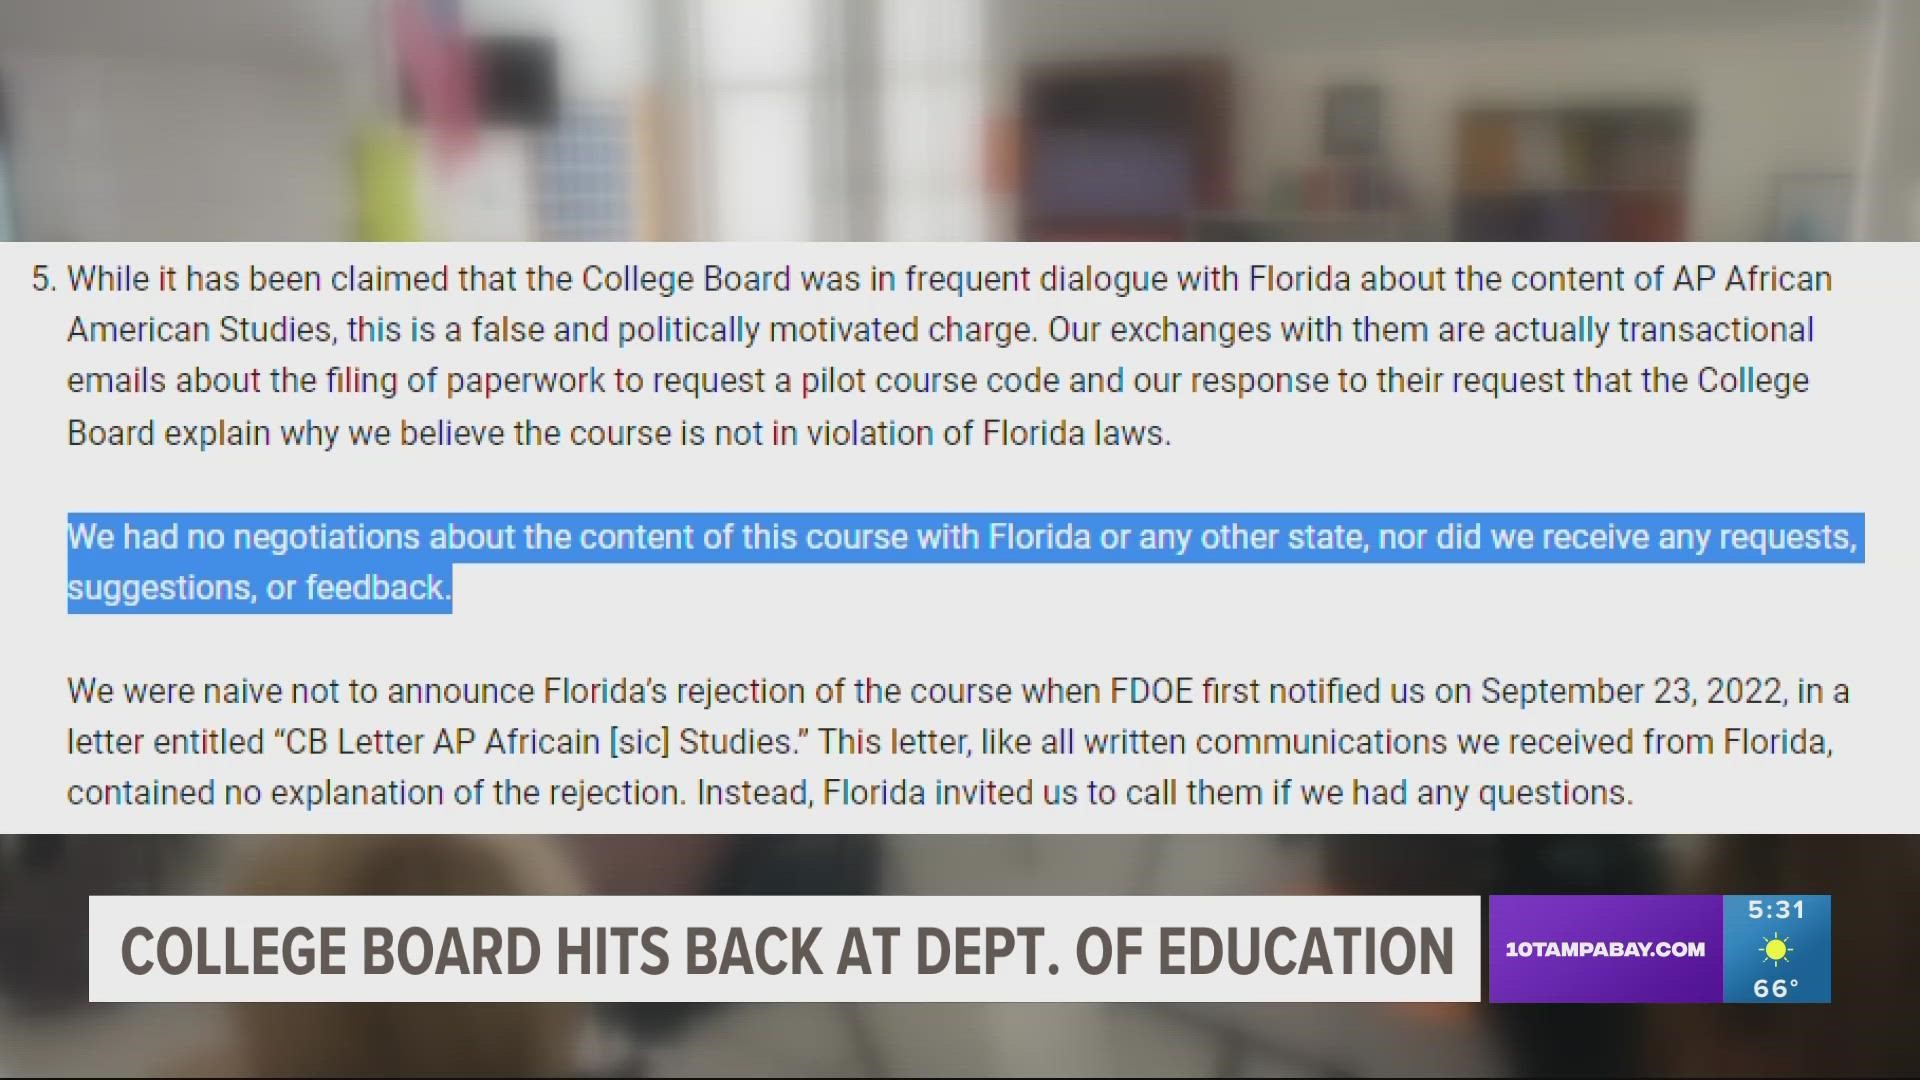 Gov. DeSantis says they may re-evaluate the state's relationship with the College Board in the wake of the controversy.